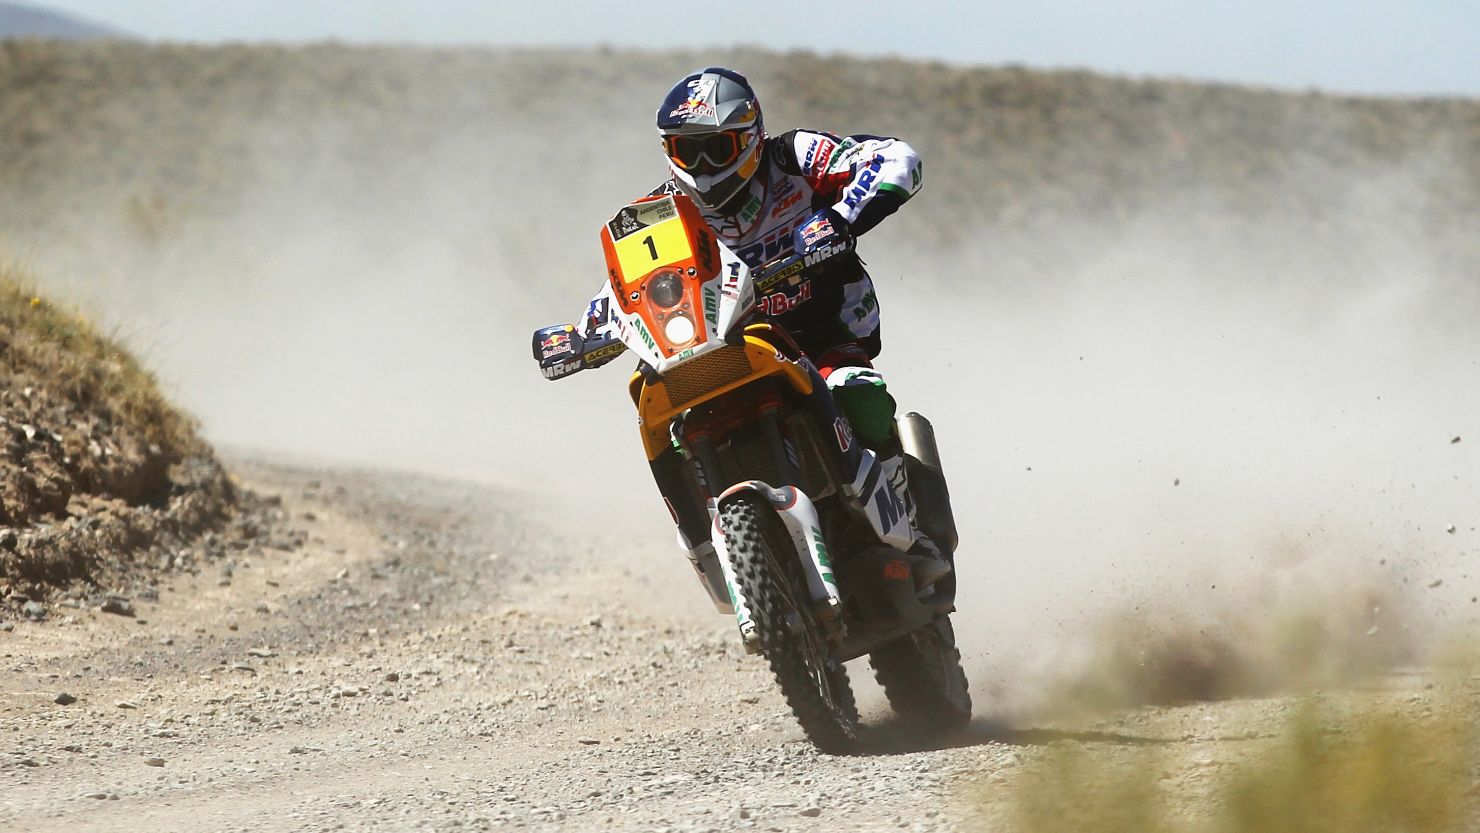 Defending champion Marc Coma won the fourth stage of the Dakar Rally but he trails leader Cyril Despres by over eight minutes.